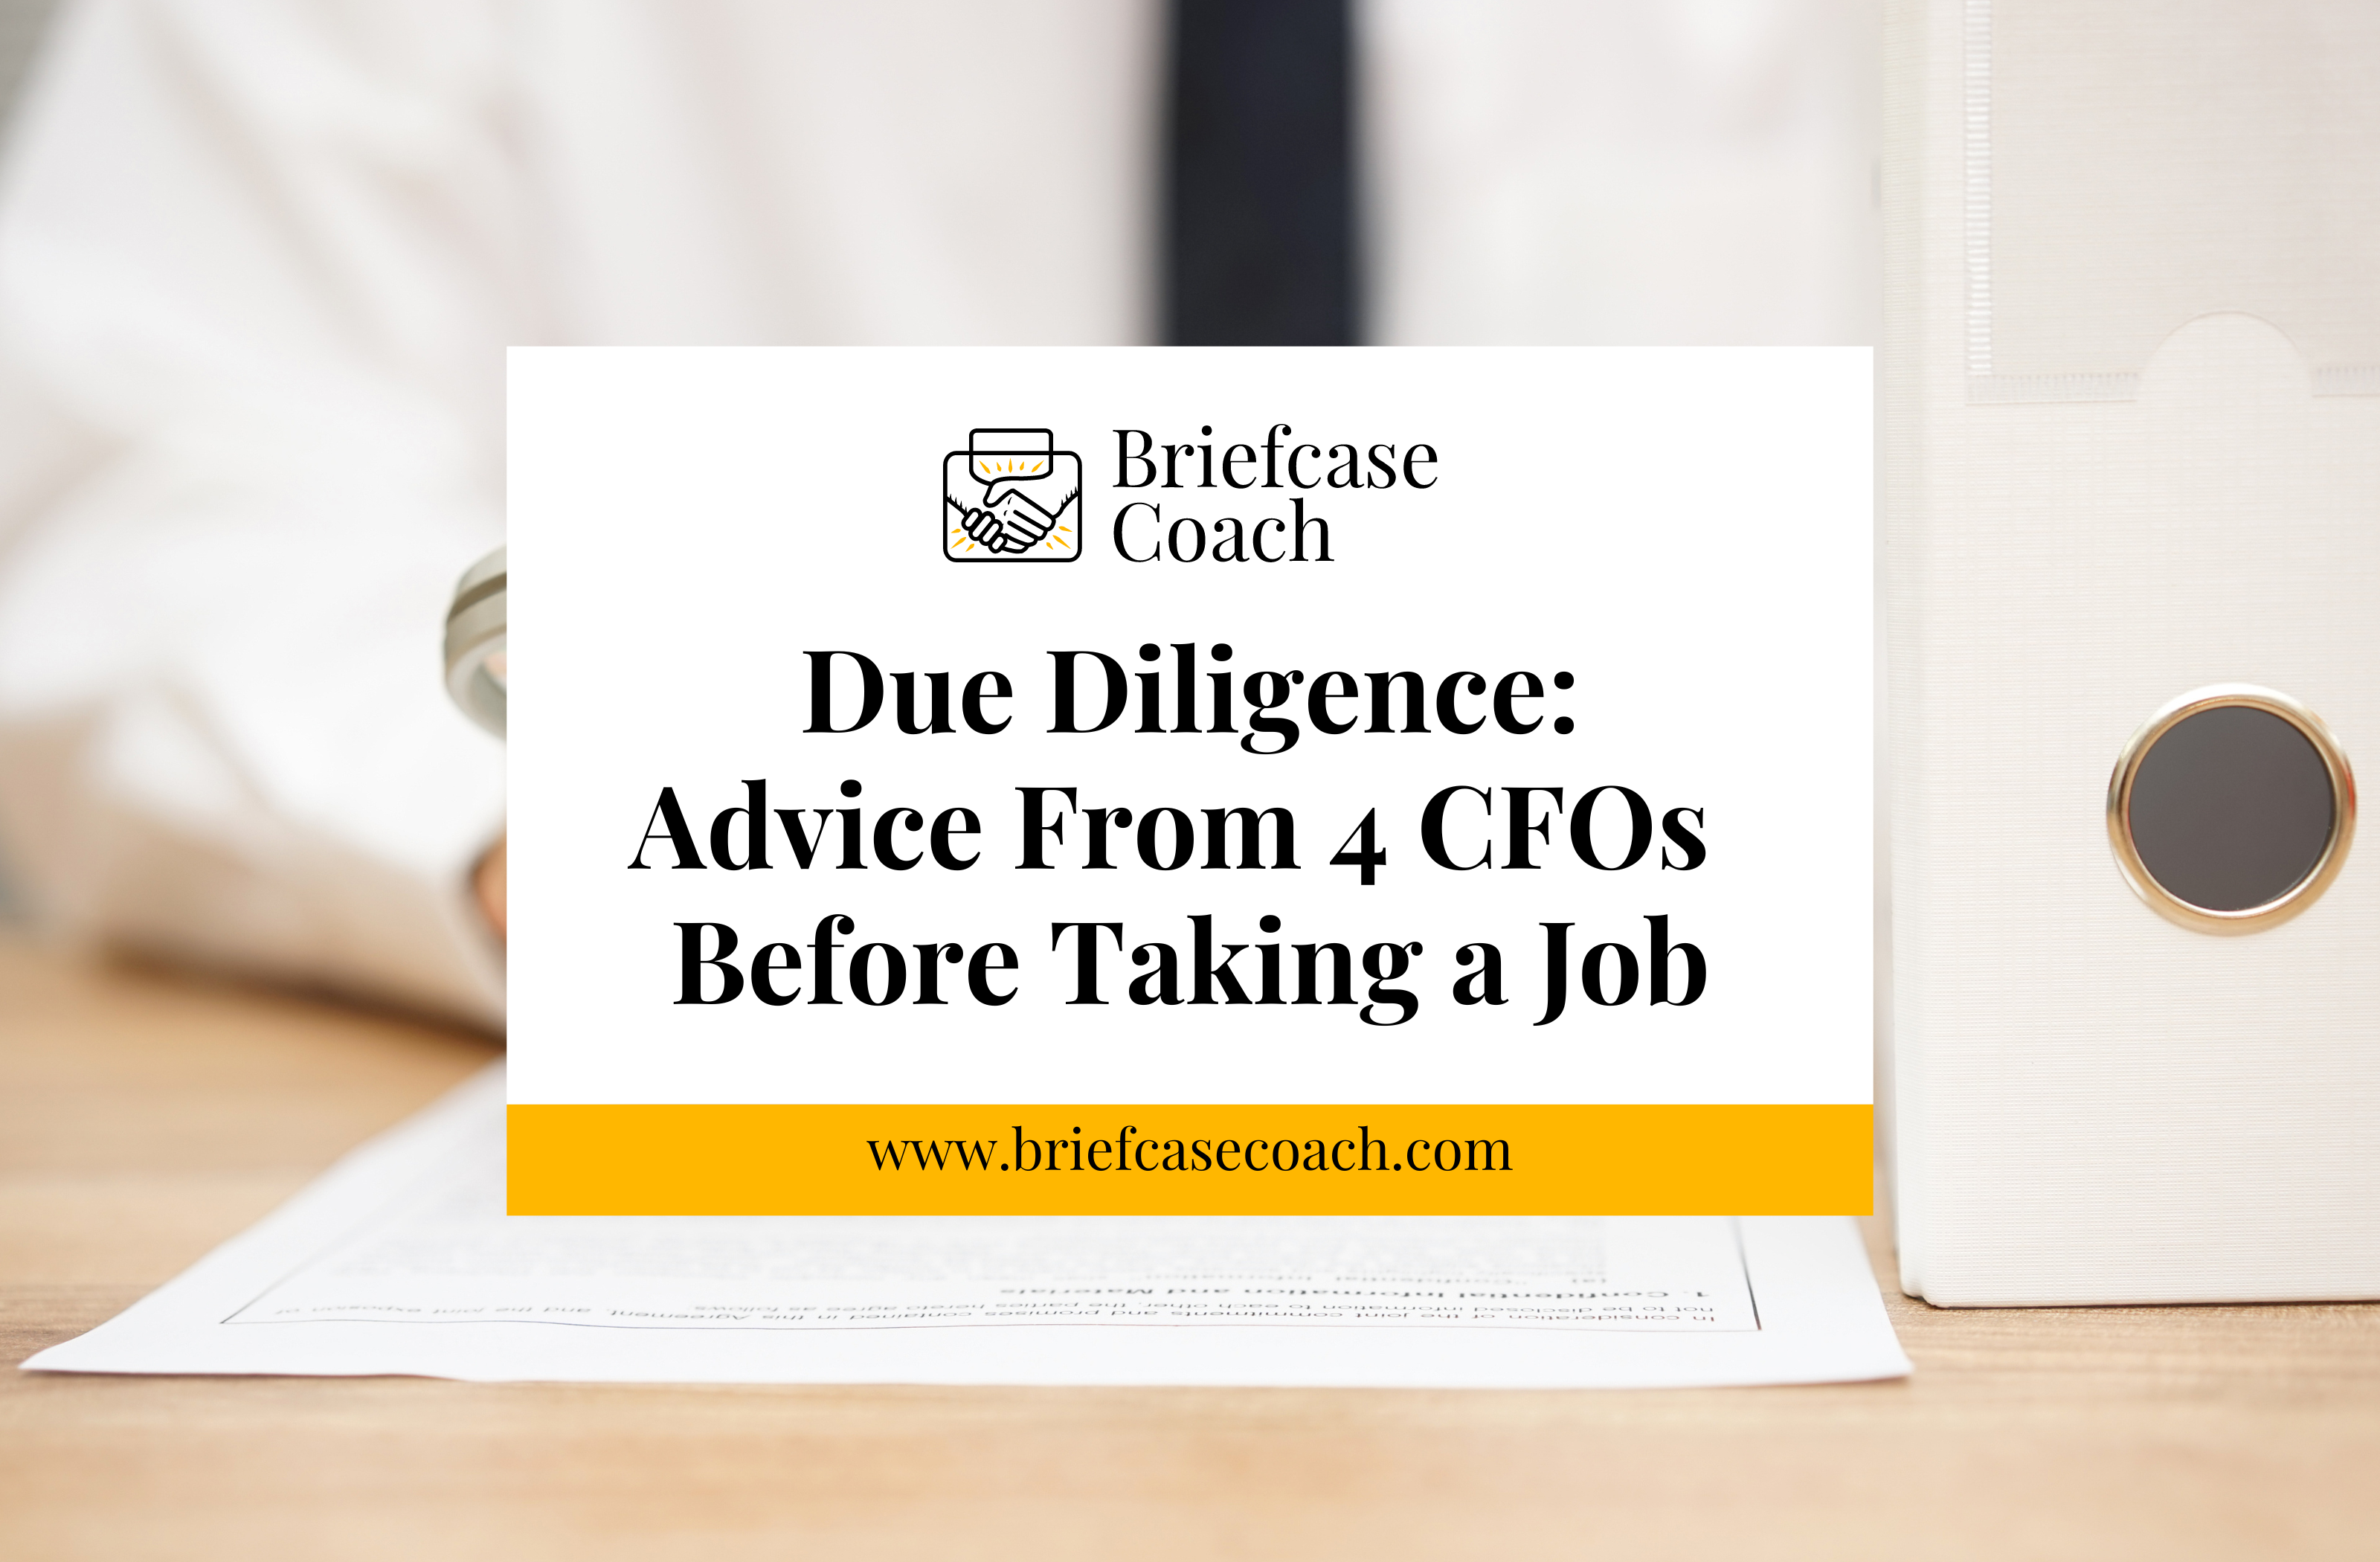 4 CFOs Give Advice on How To Conduct Company Due Diligence